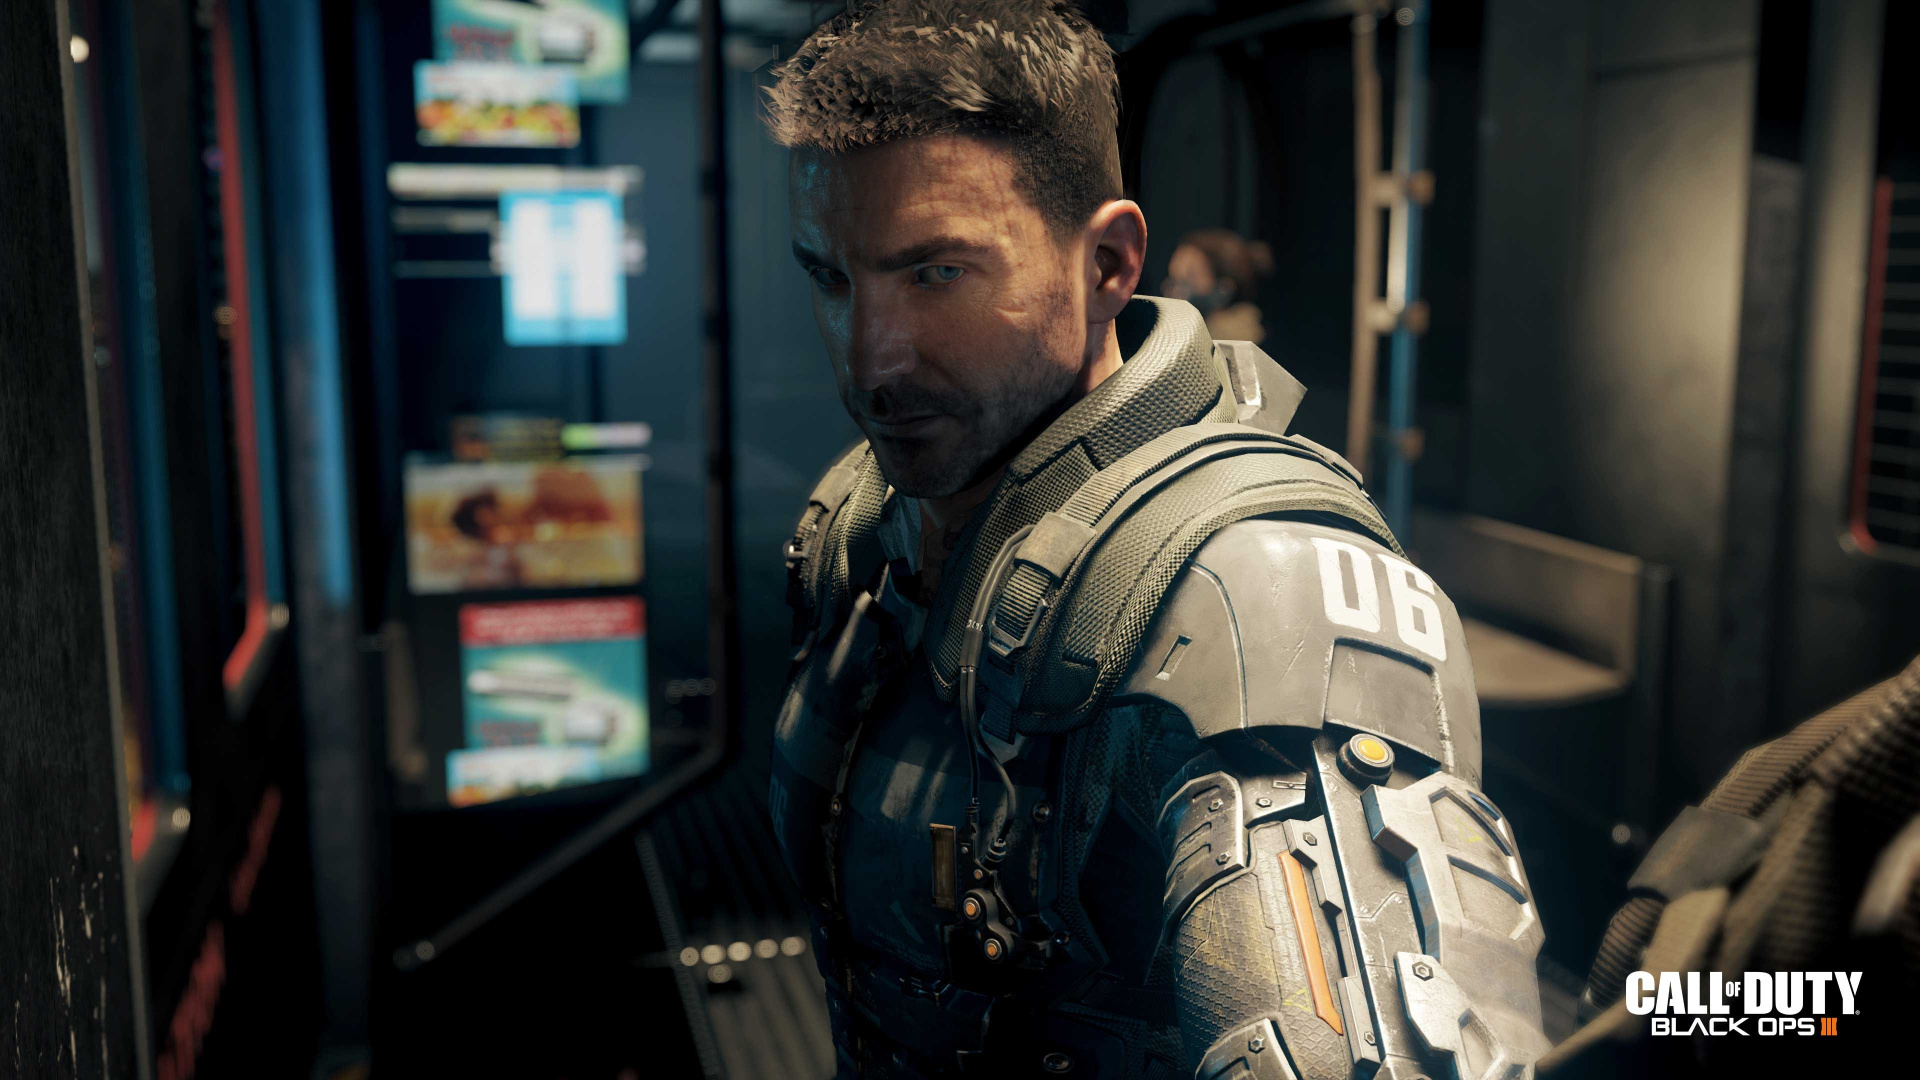 Call of Duty: Black Ops III (for PlayStation 4) Review